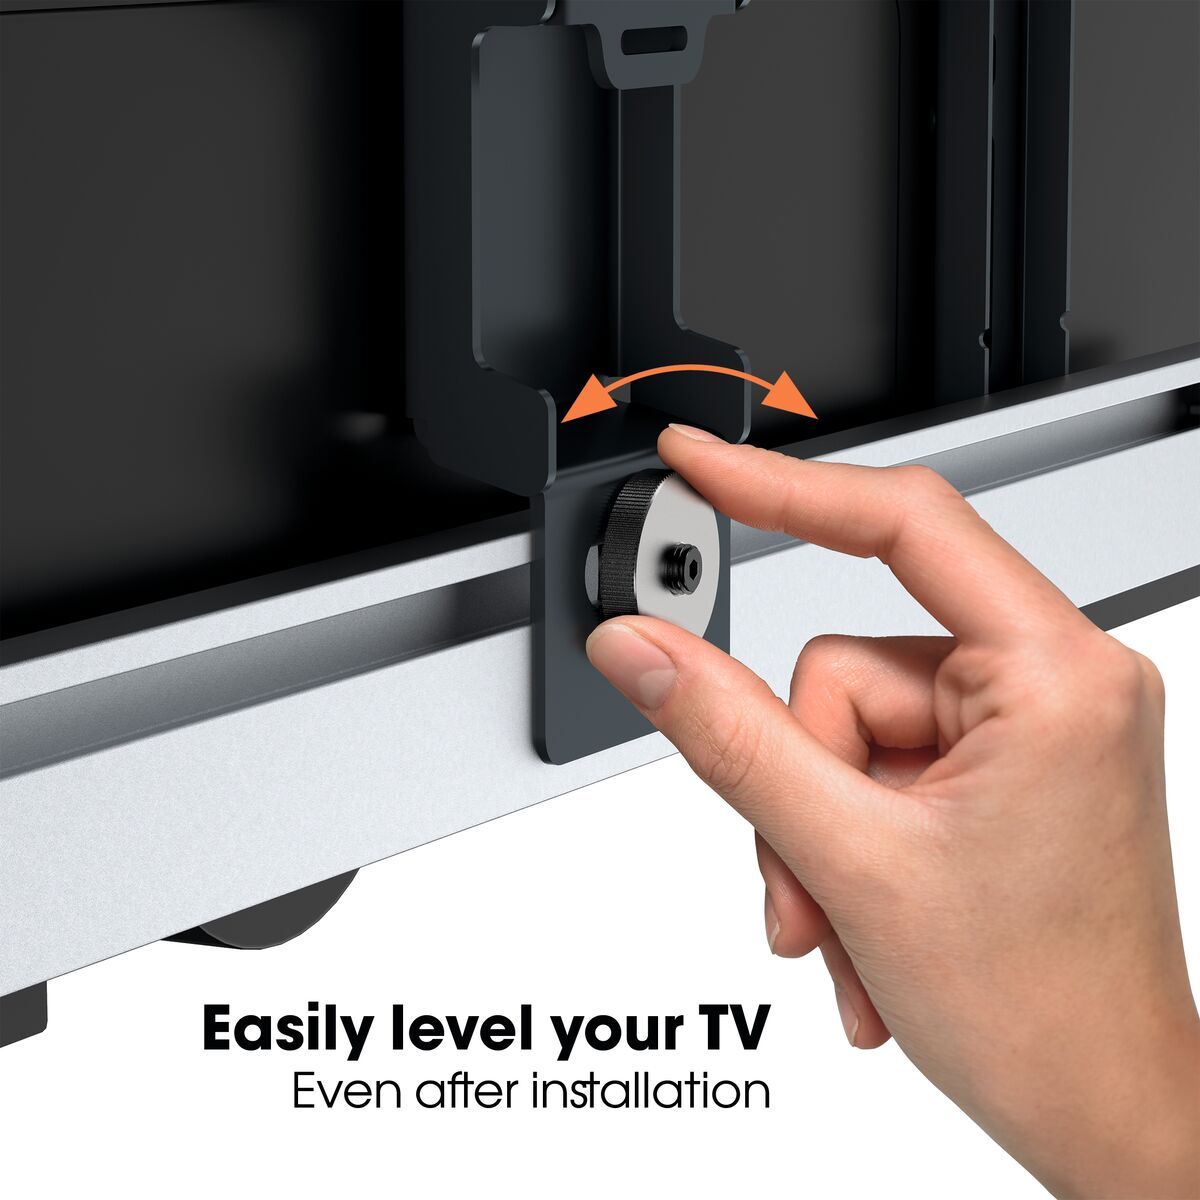 Vogel's THIN 546 ExtraThin Full-Motion TV Wall Mount for OLED TVs (black) - Suitable for 40 up to 65 inch TVs - Full motion (up to 180°) - USP